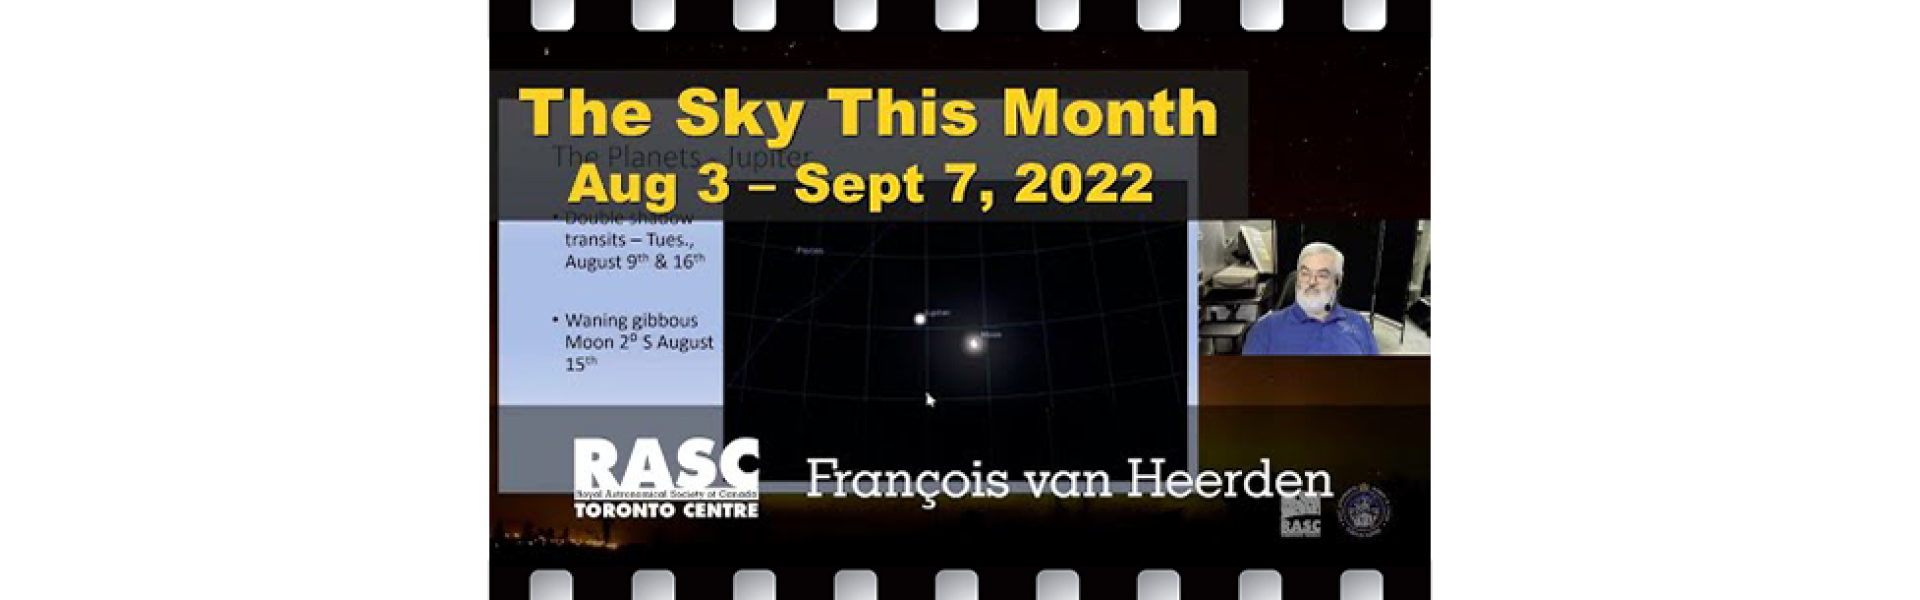 The Sky This Month, Aug 3 - Sept 7, 2022